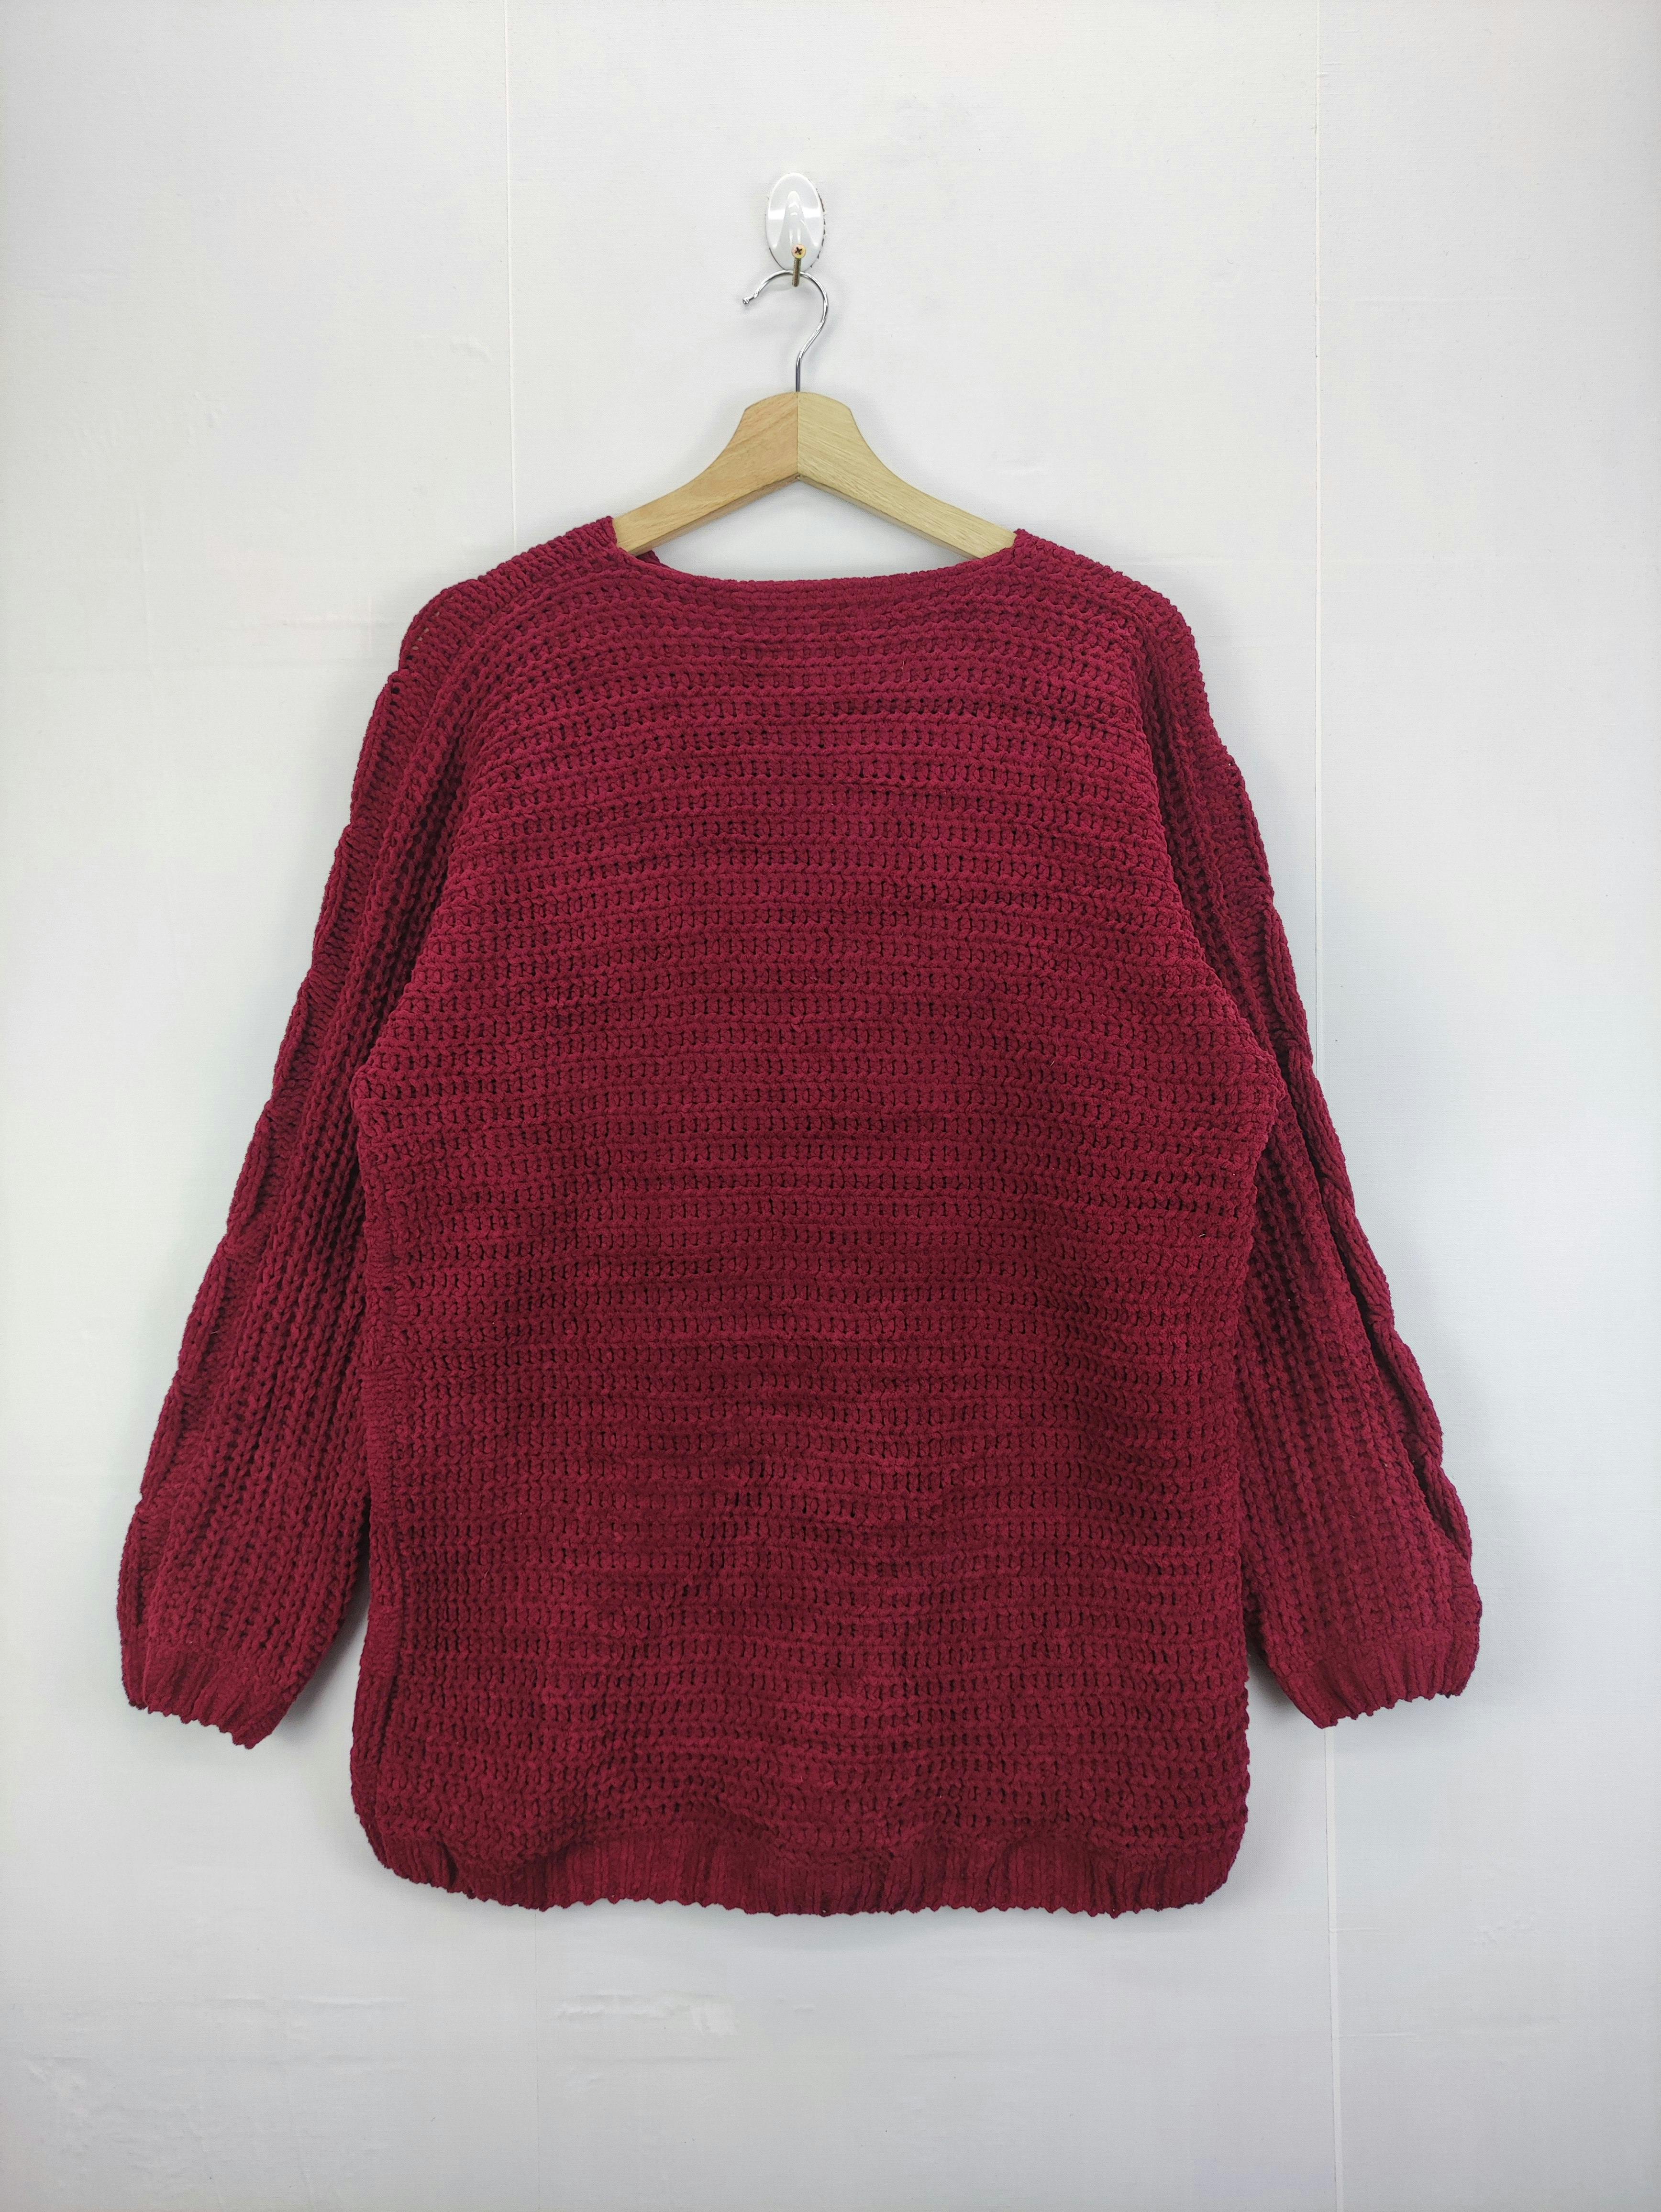 Vintage Cable Knit Sweater By Furry rate - 5